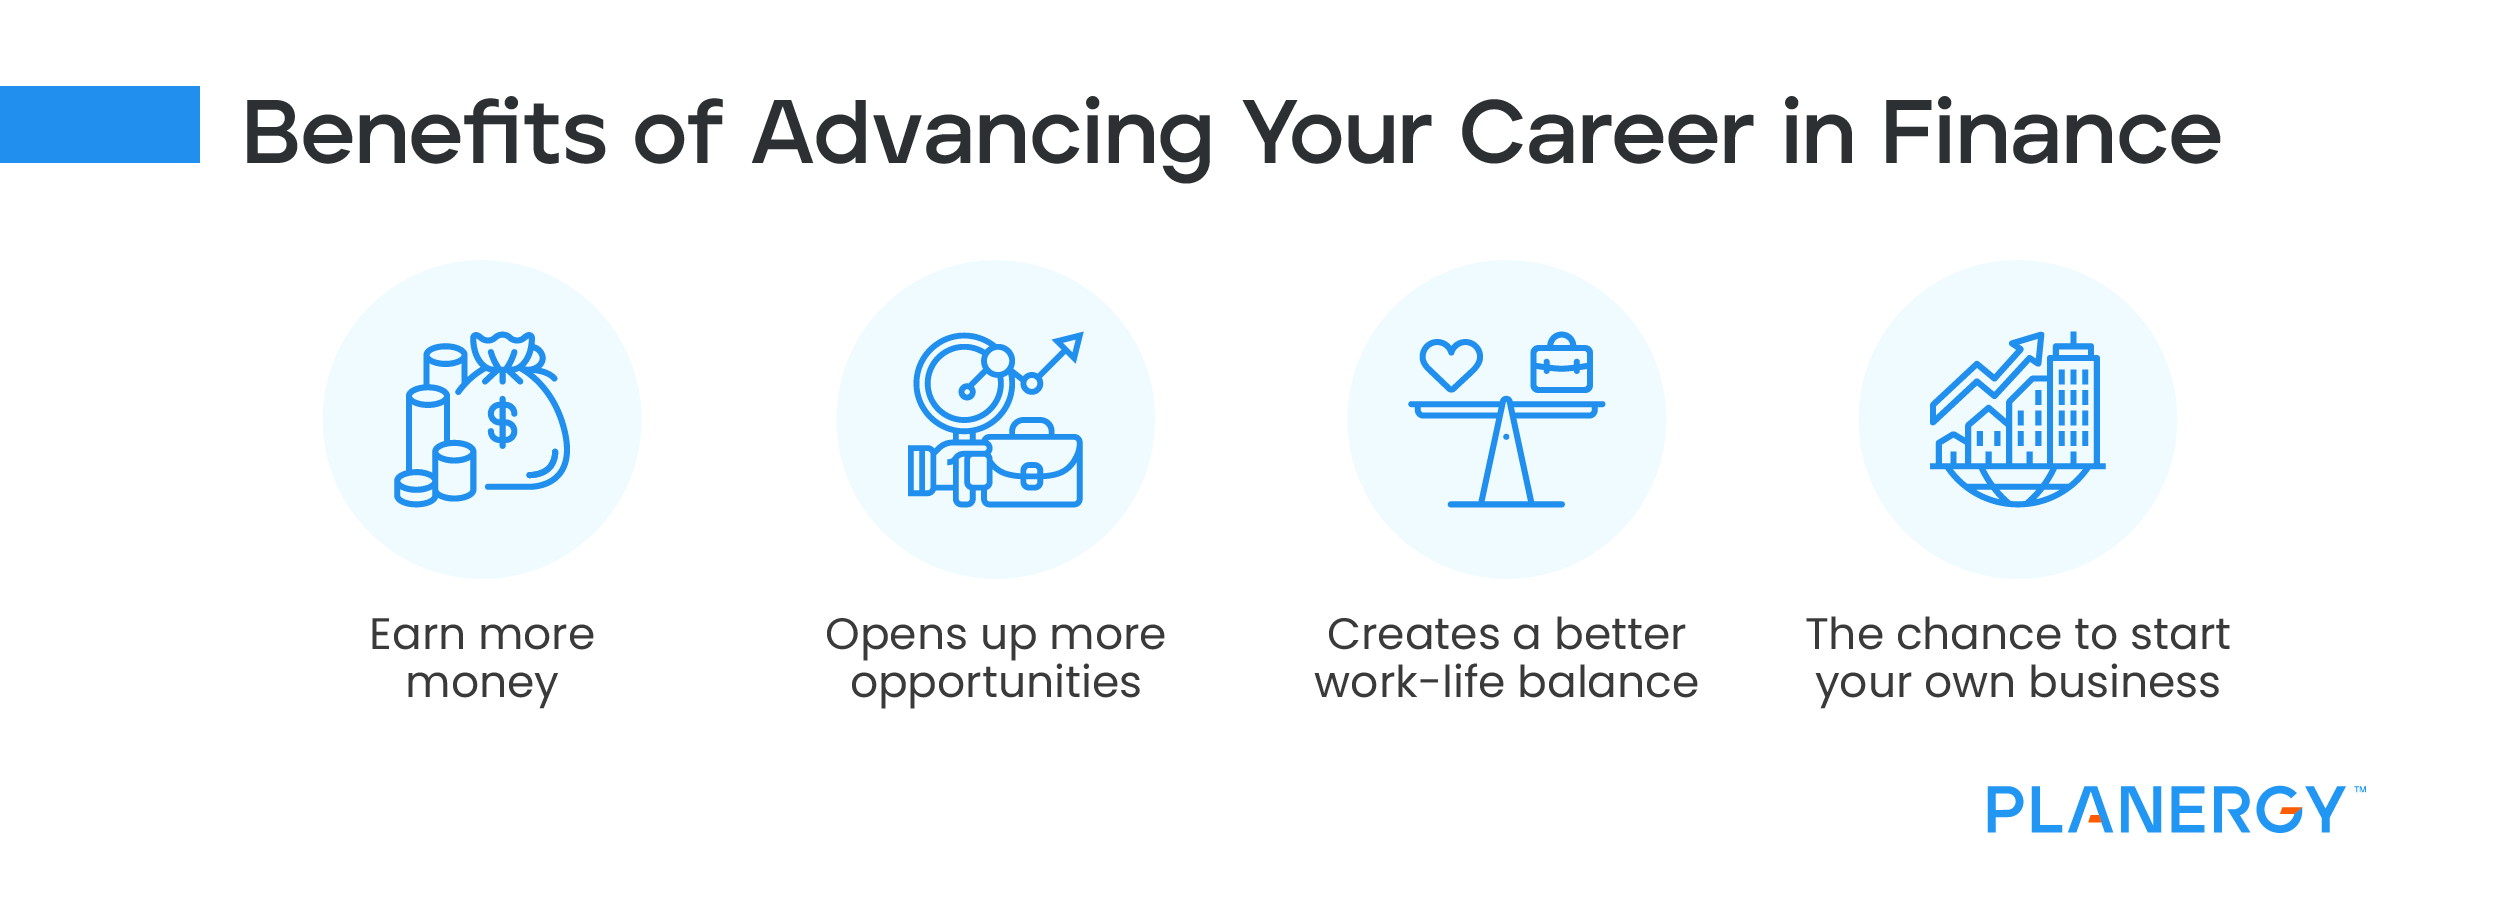 Benefits of Advancing Your Career in Finance